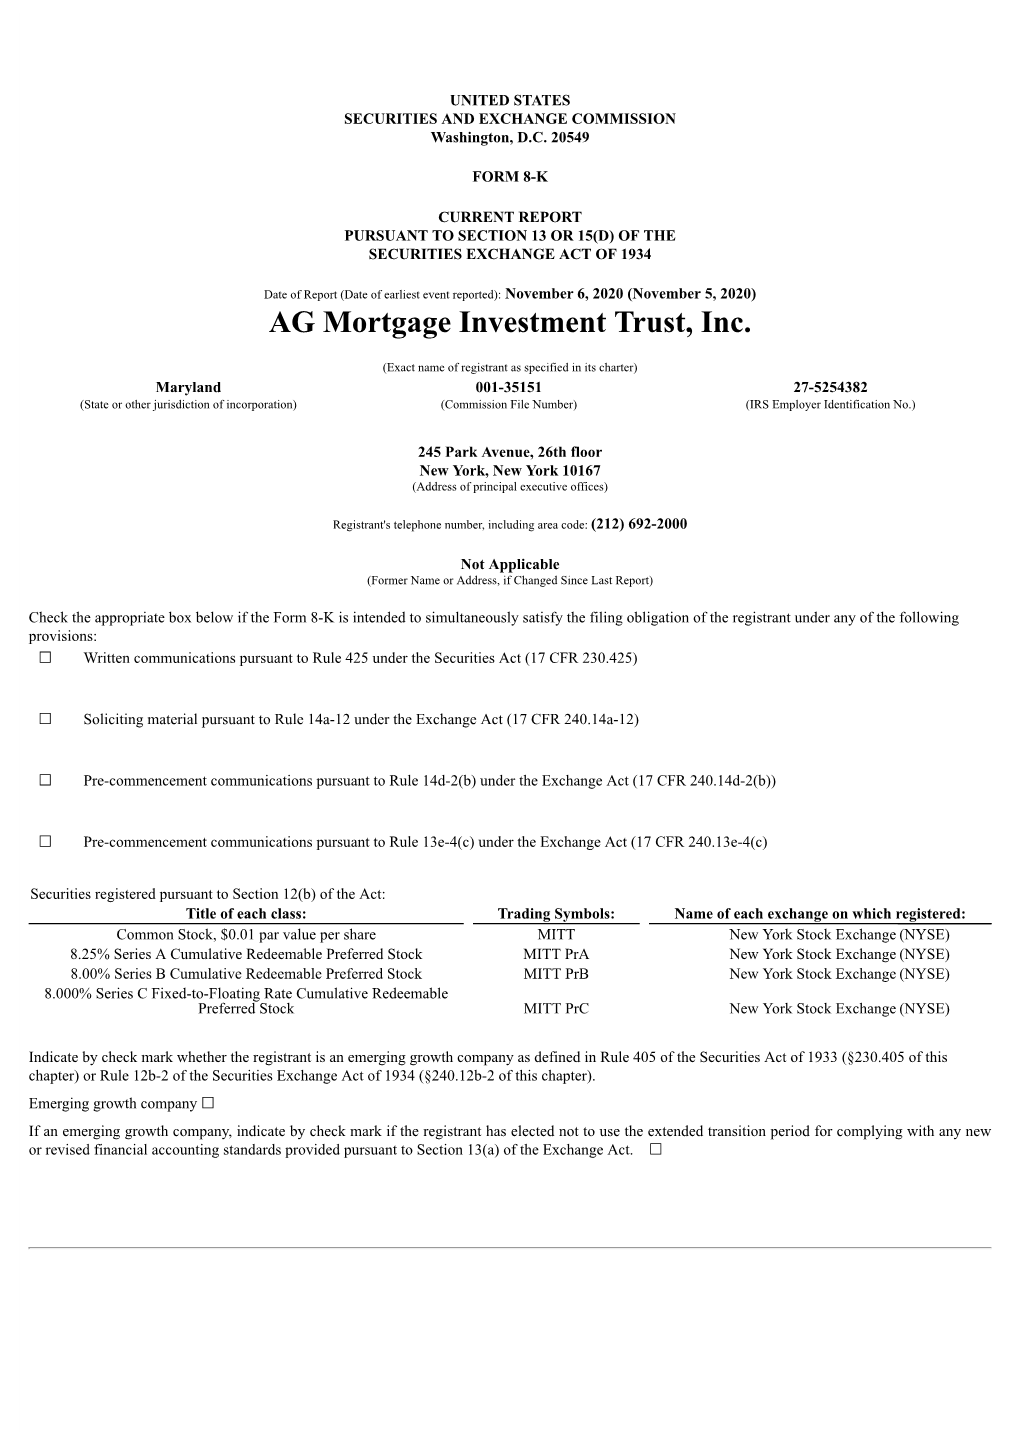 AG Mortgage Investment Trust, Inc